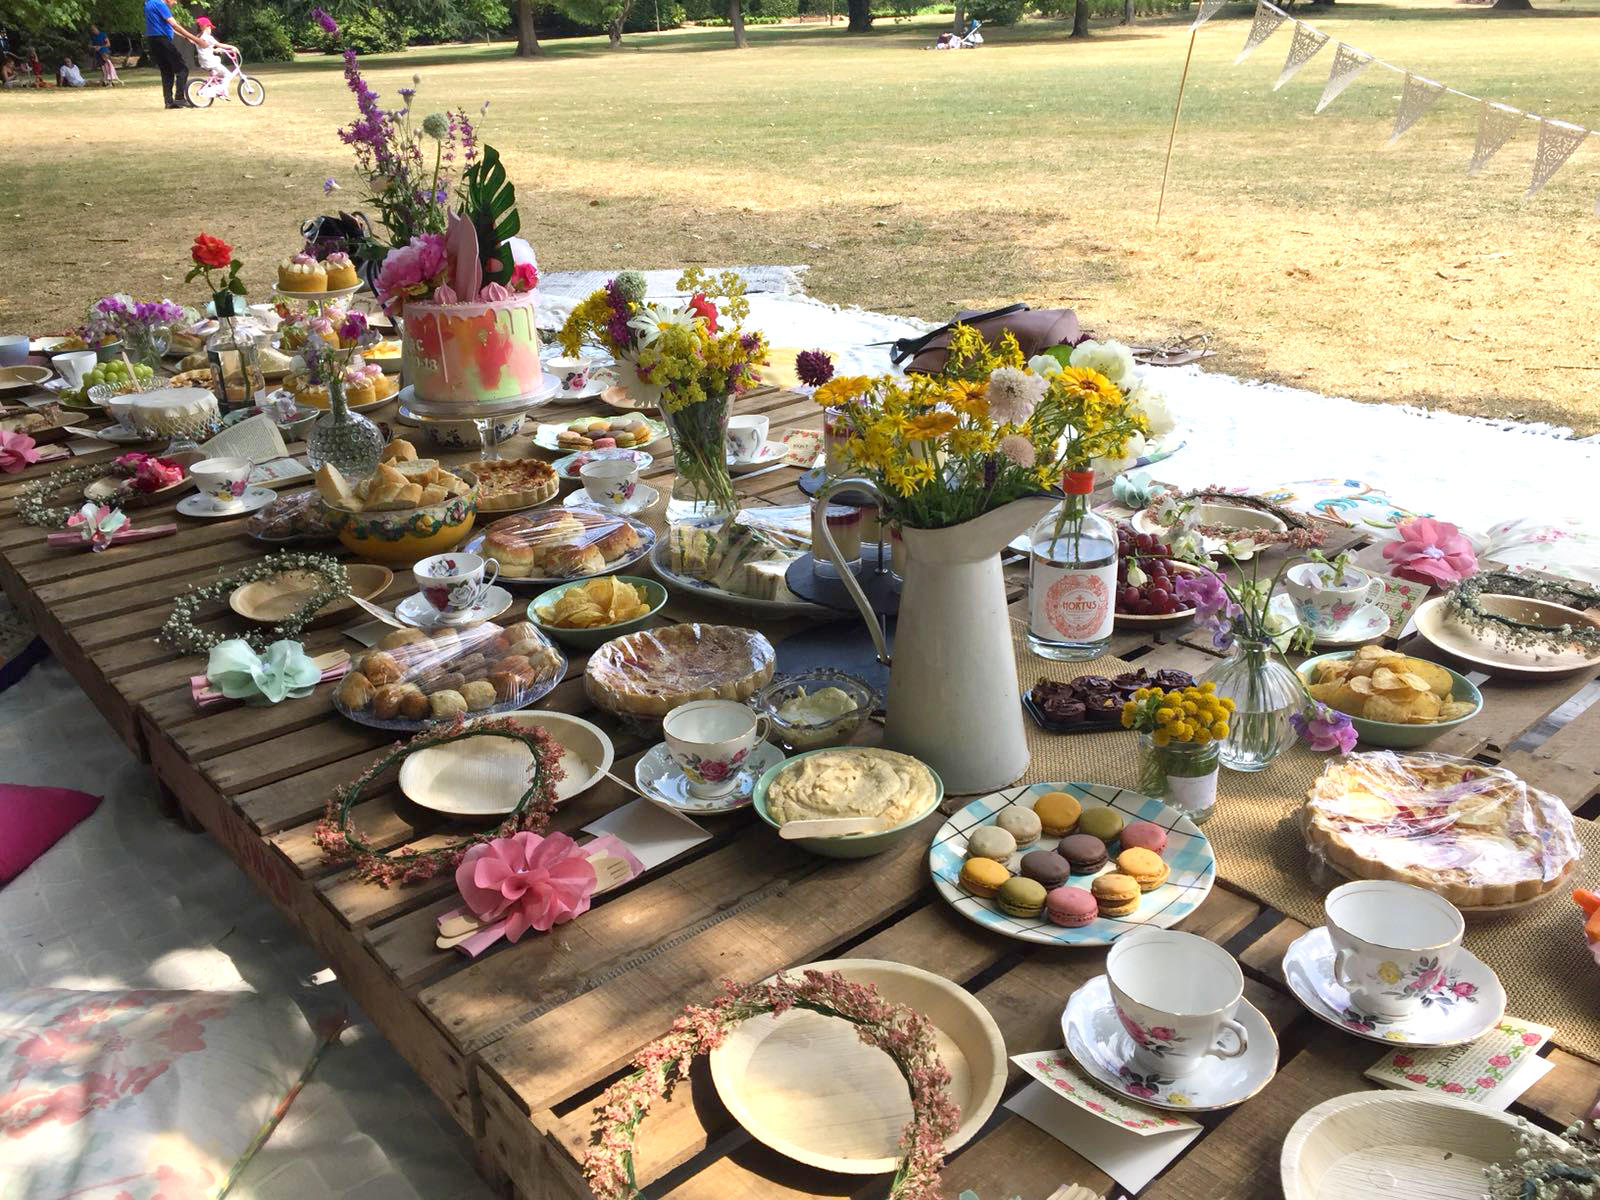 Pallet table outdoor picnic in the park with flowers and afternoon tea cakes